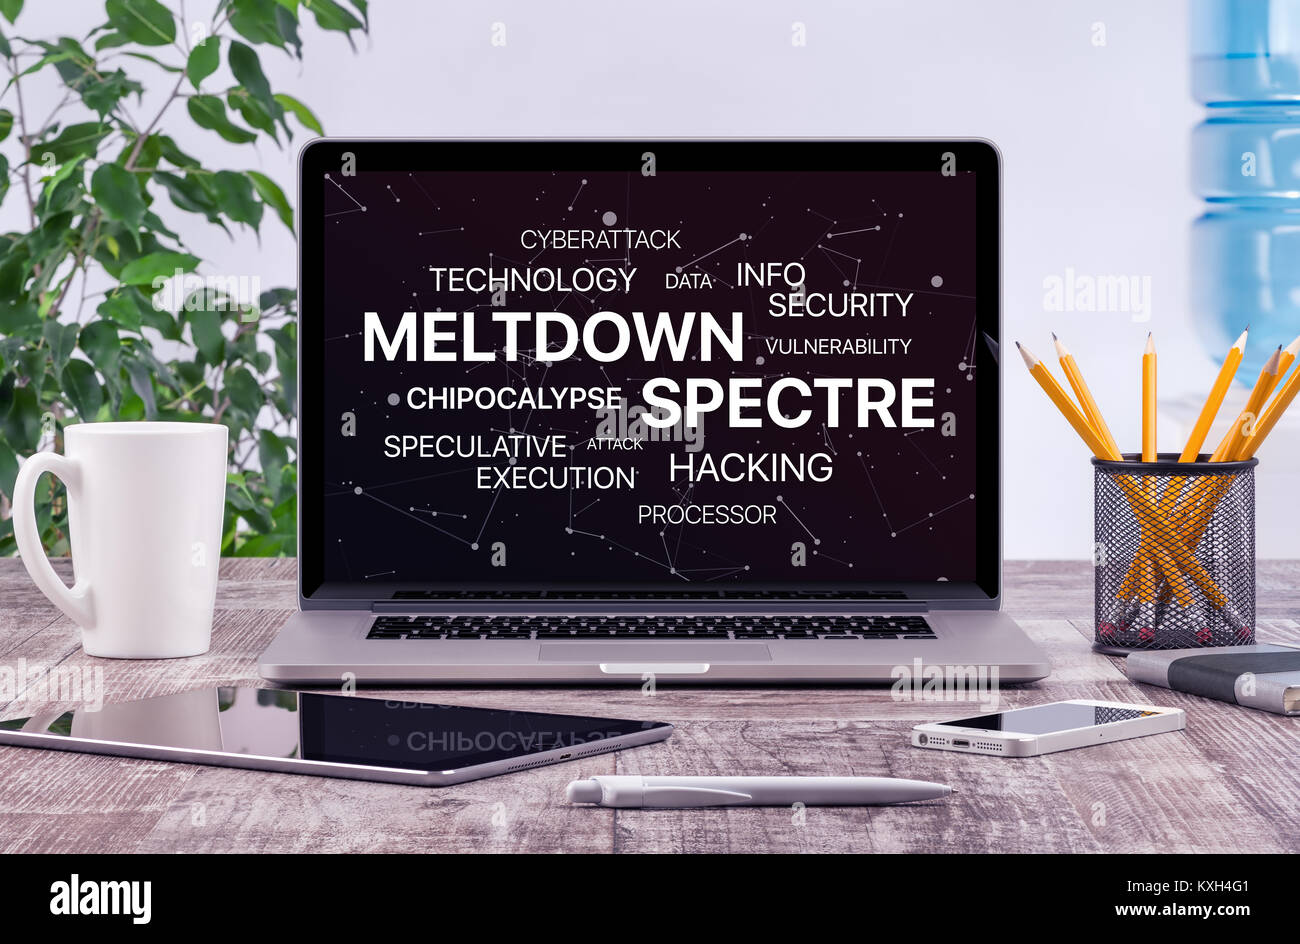 Meltdown and spectre threat concept on laptop screen in office workplace. Stock Photo